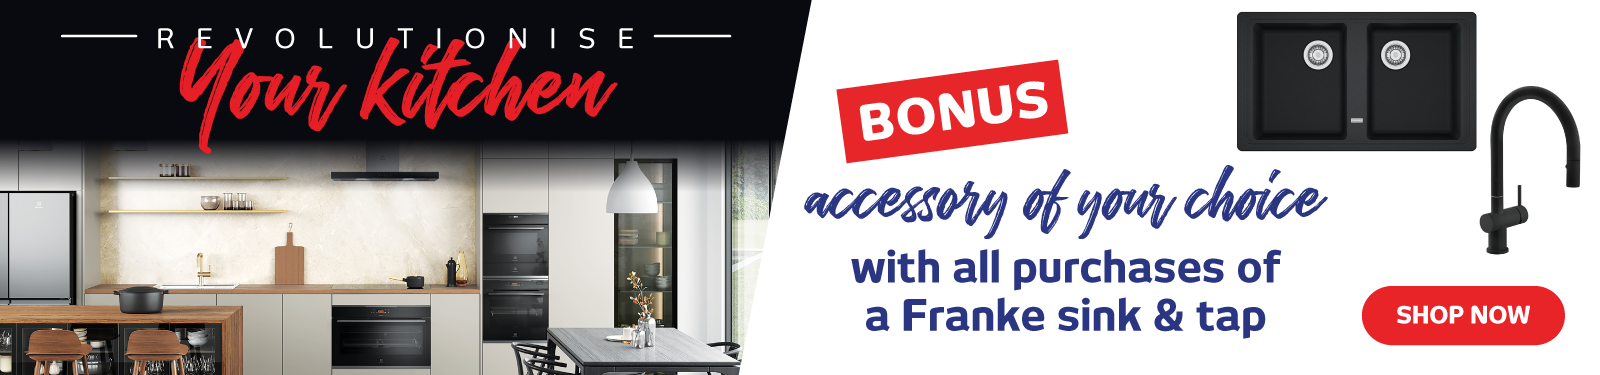 Premium Kitchen Catalogue - Bonus Accessory With Purchase Of Any Franke Sink And Tap